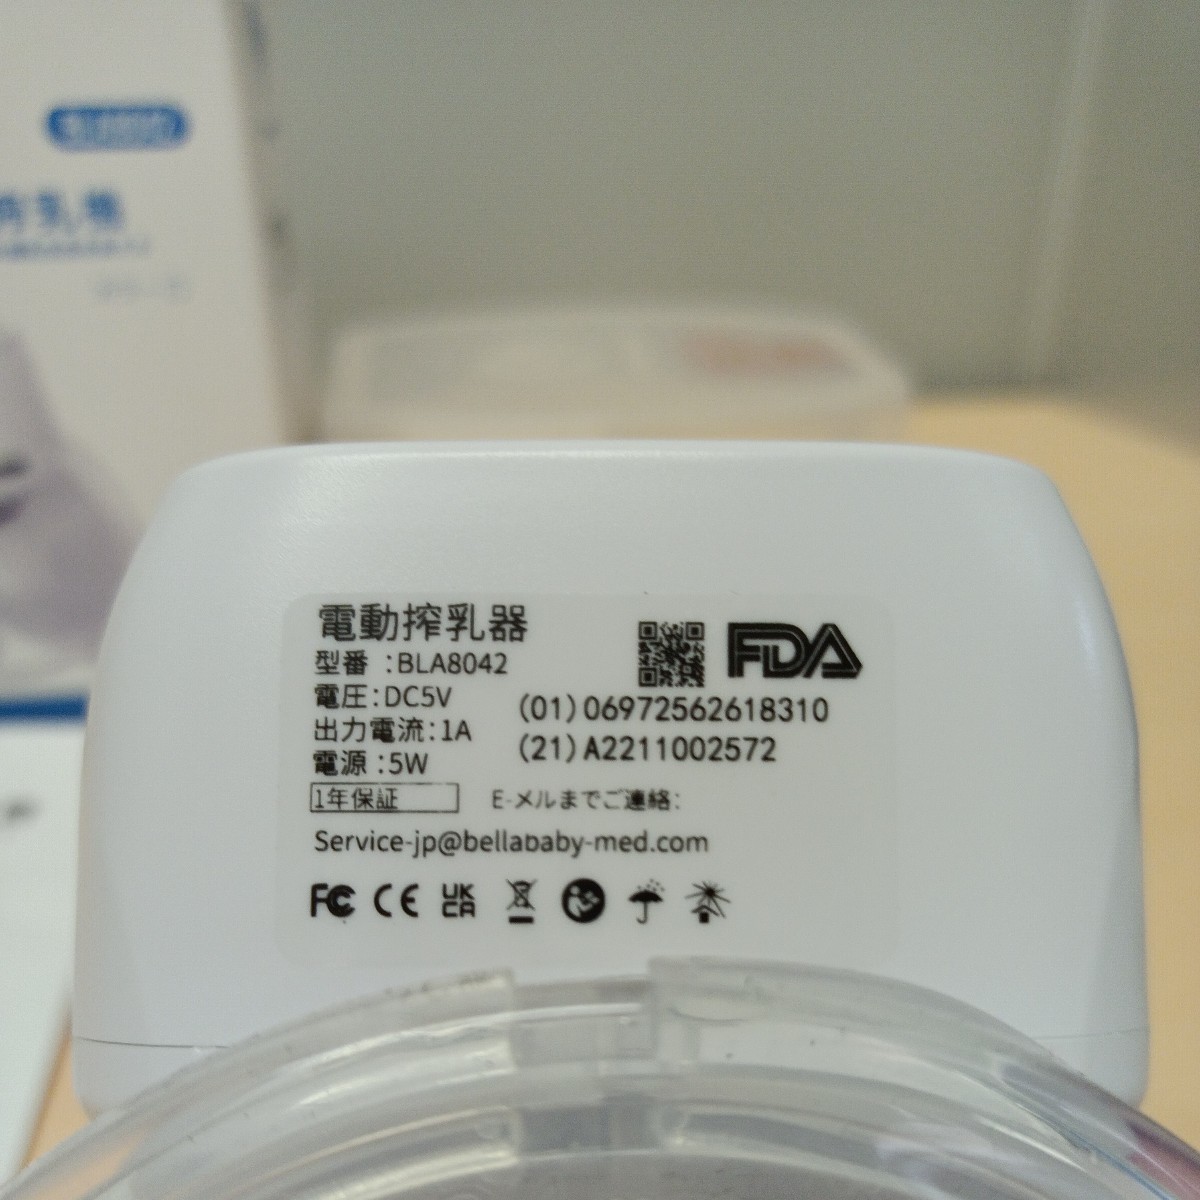 y011706fk electric milk pump Bellababy... vessel hands free wearable milk pump low noise 4 kind mode 6 Revell. absorption power reverse . prevention mobile convenience 